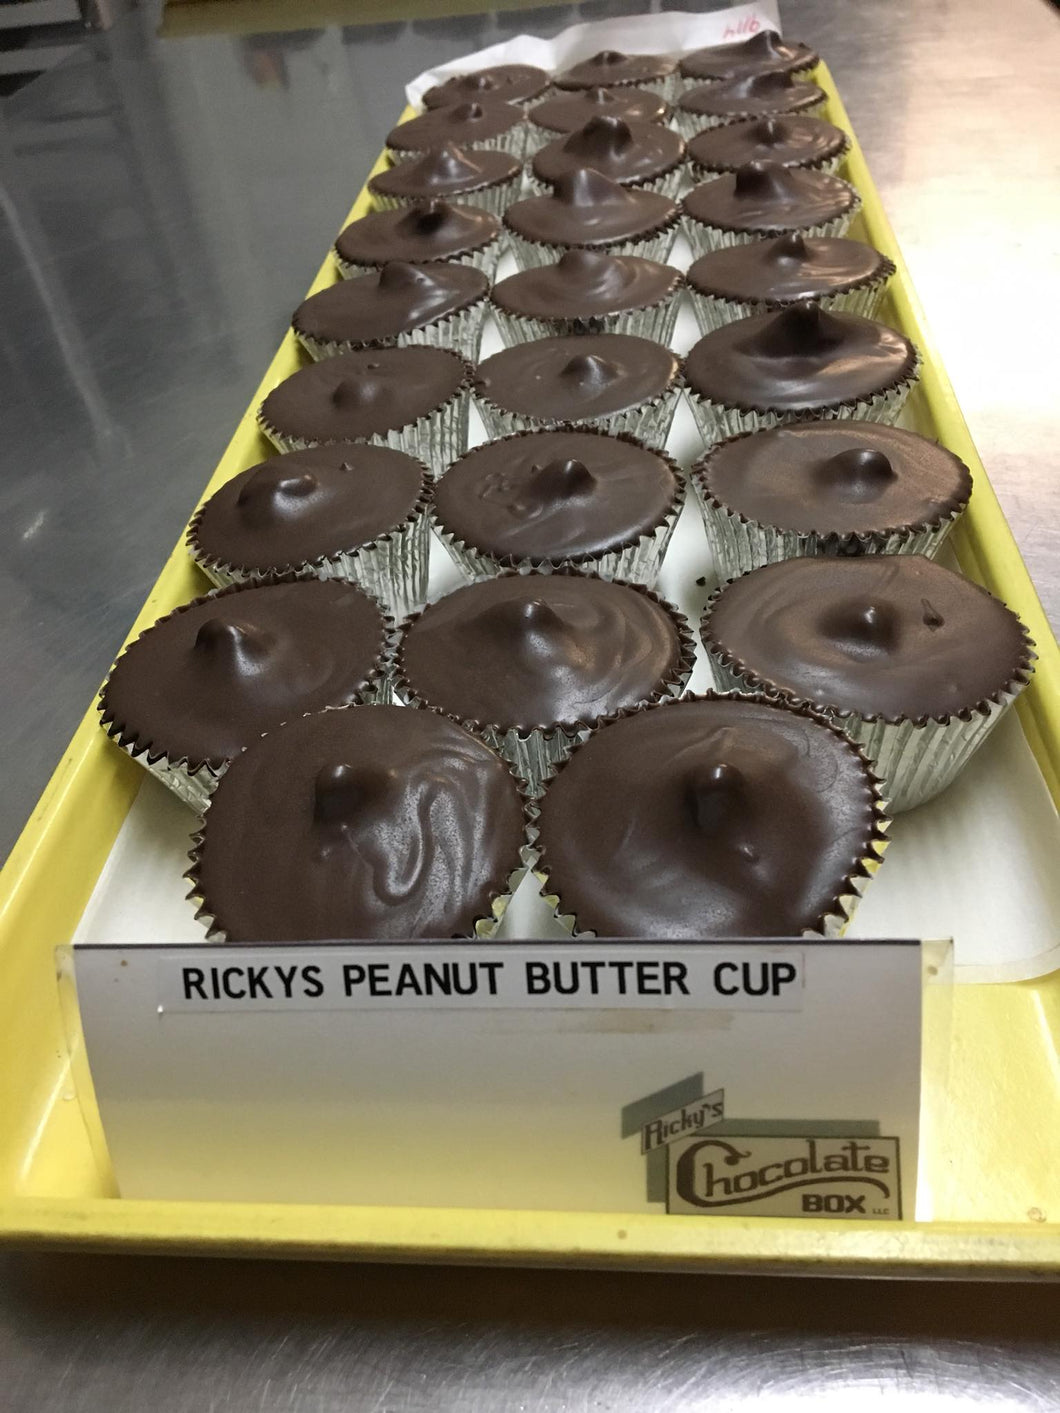 Ricky's Peanut Butter Cup